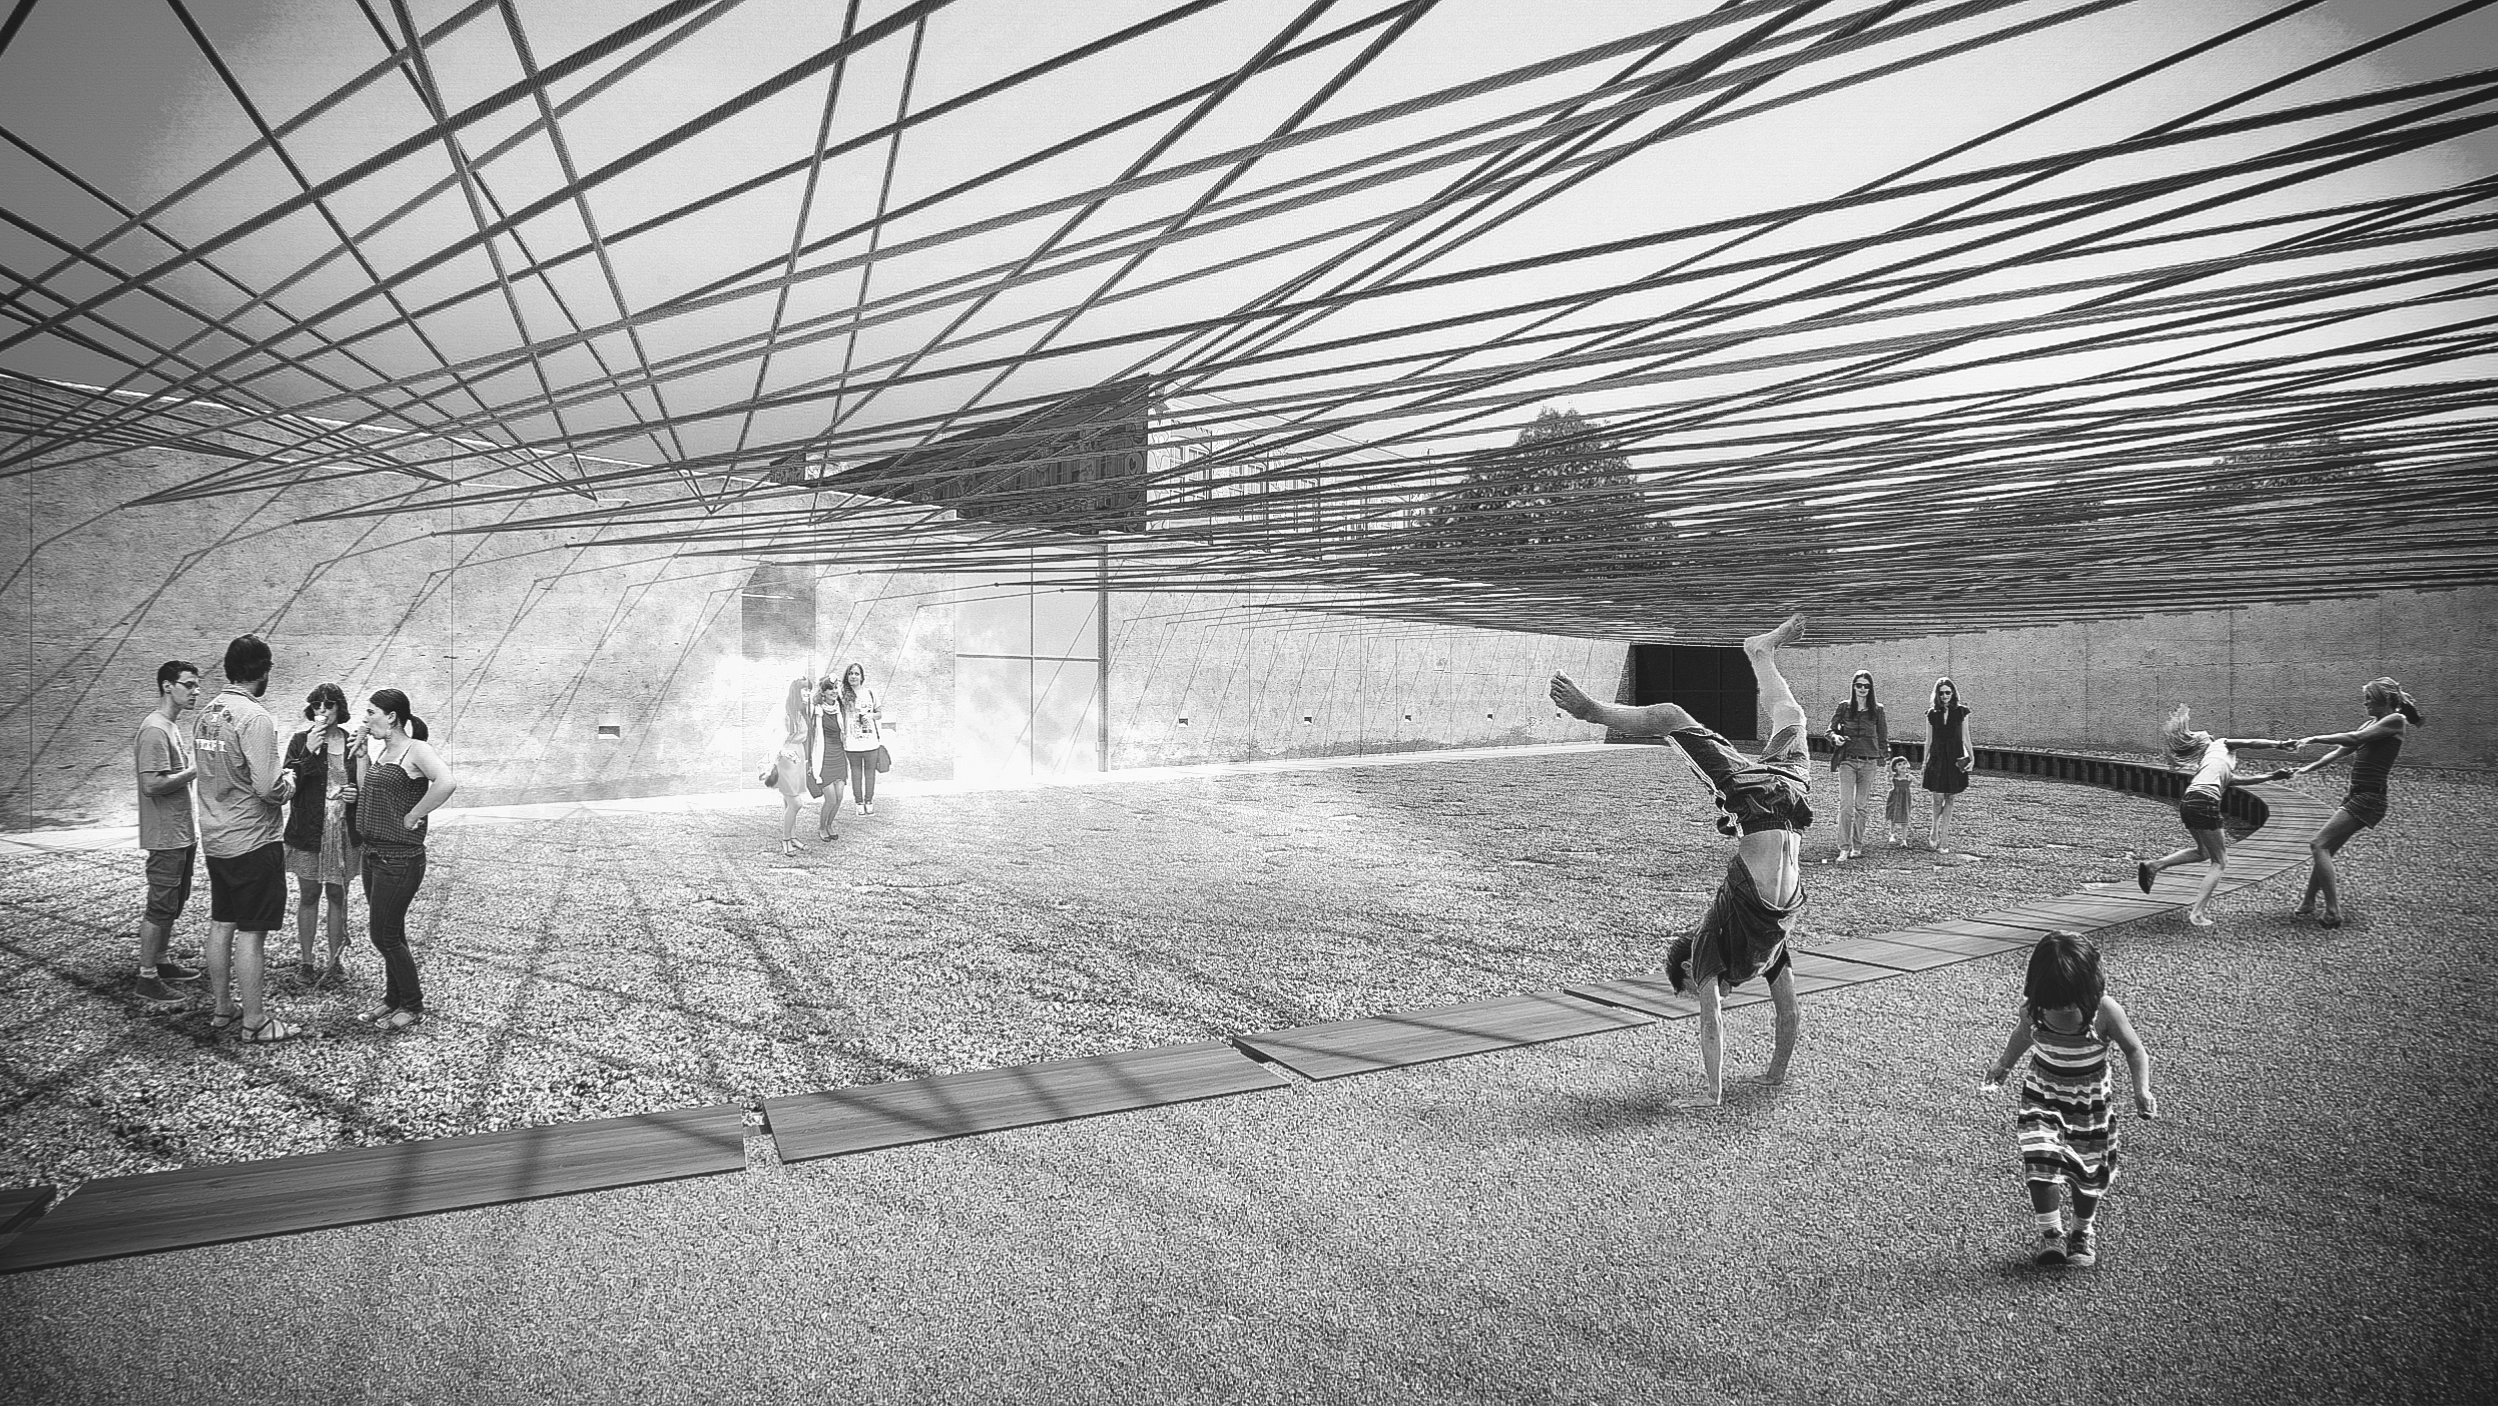 Designers Will Knit A Neon Rope Canopy Over MoMA’s Concrete Courtyard This Summer